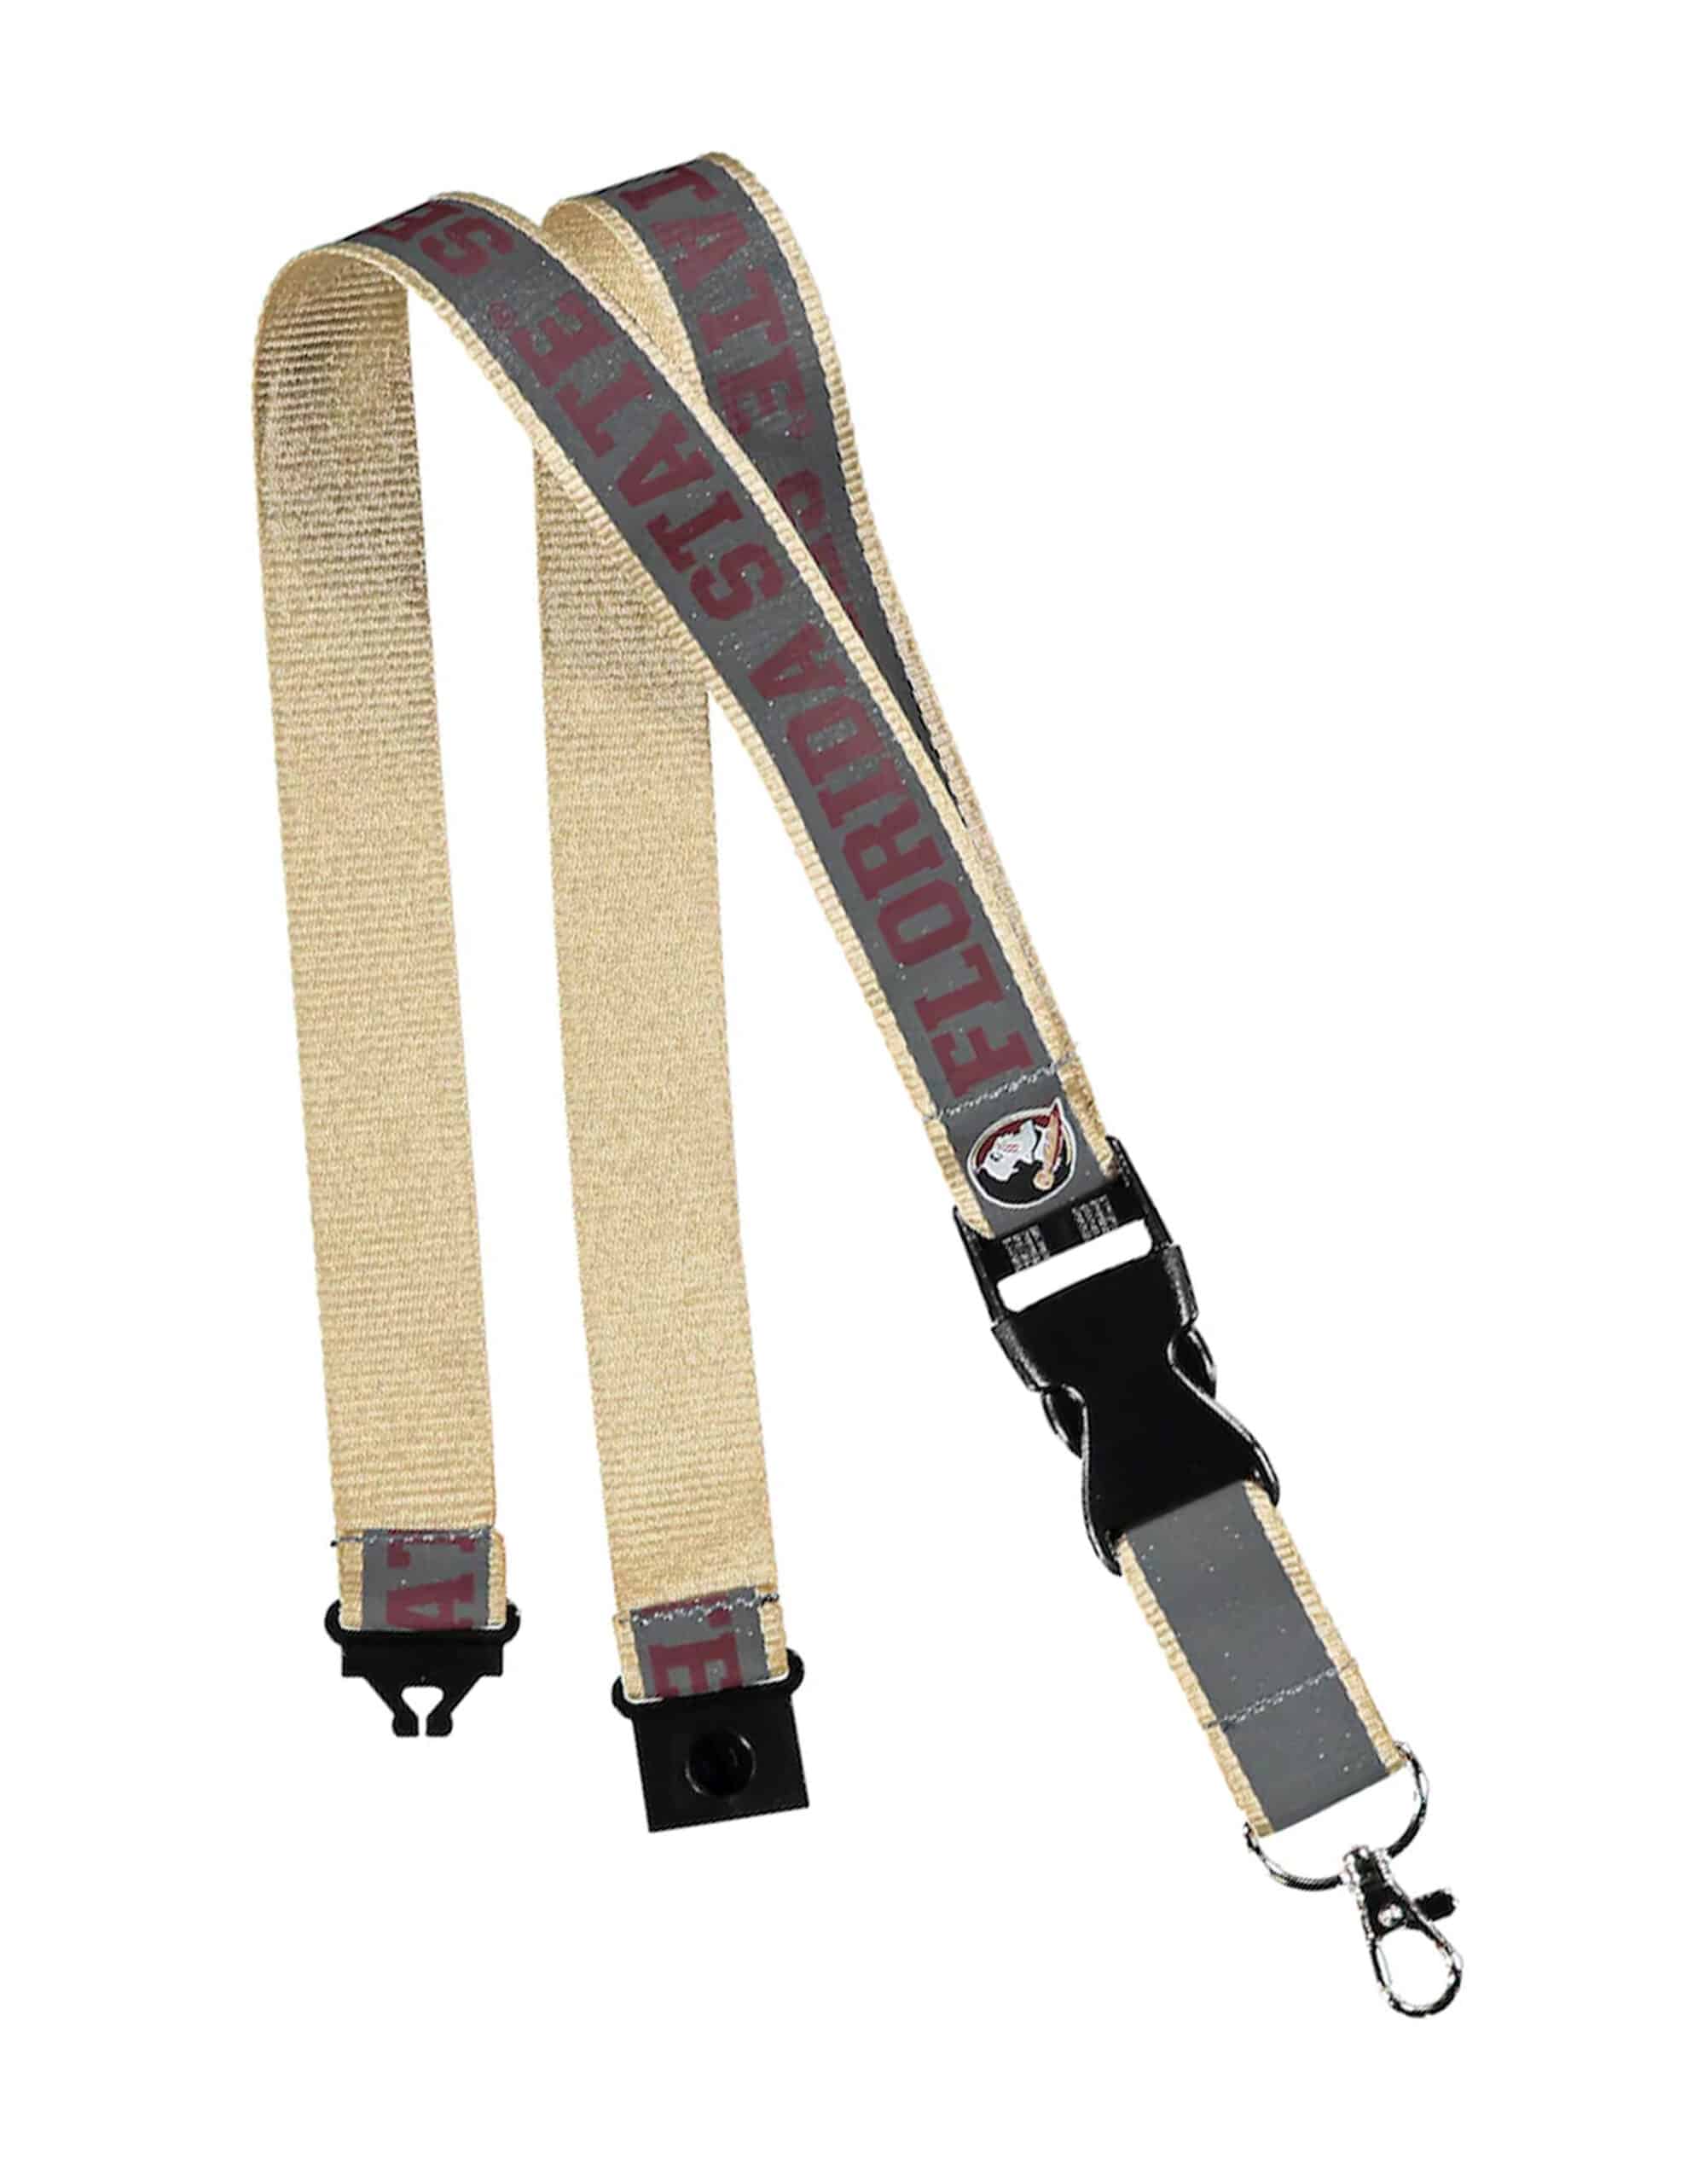 FSU Reflective Lanyard Detachable Buckle - Barefoot Campus Outfitter